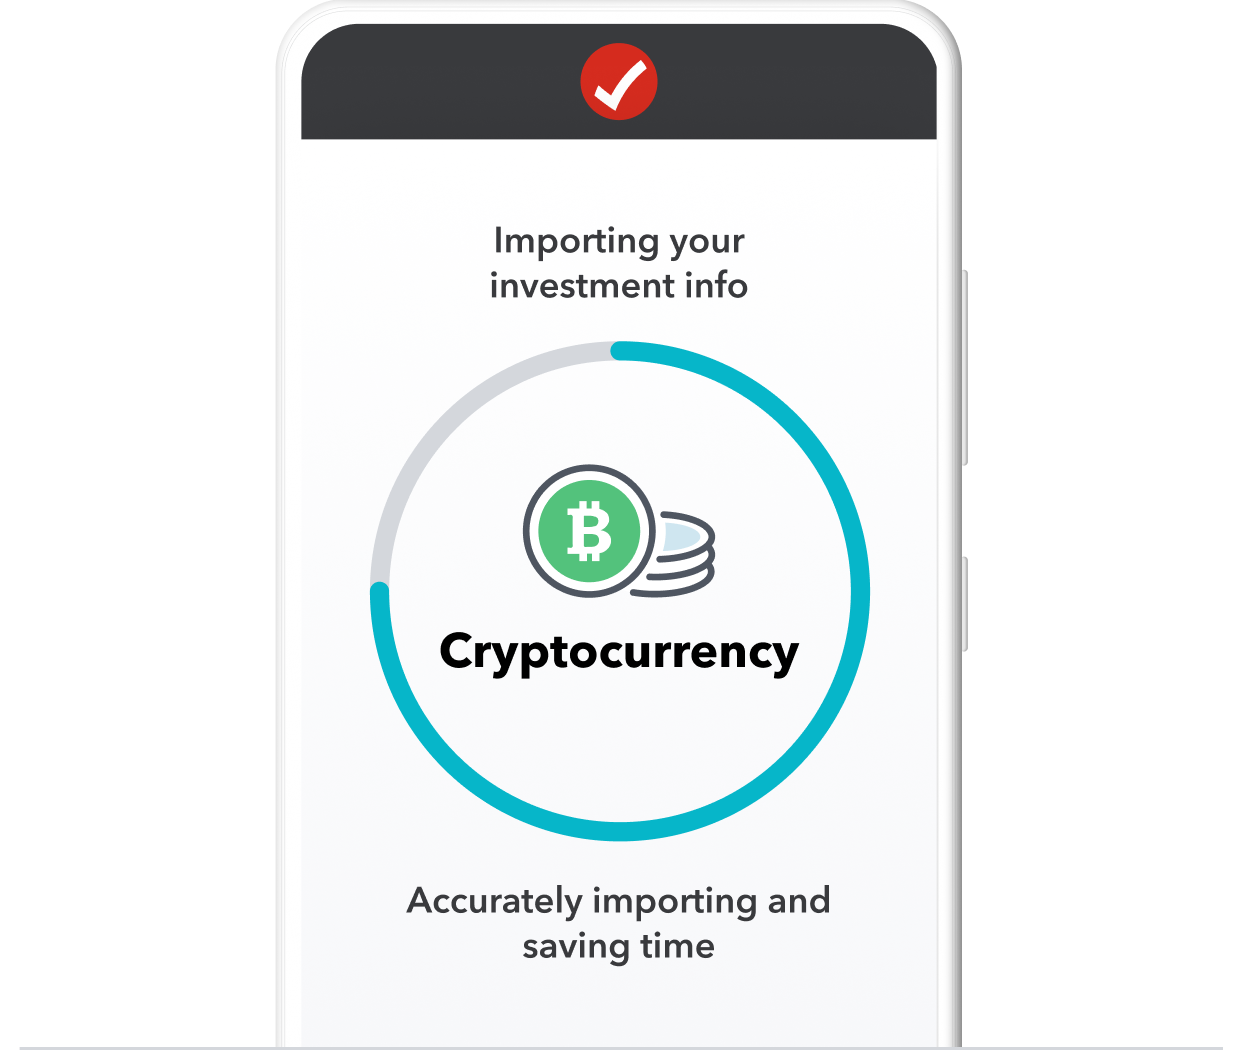 TurboTax imports your cryptocurrency and investment info.